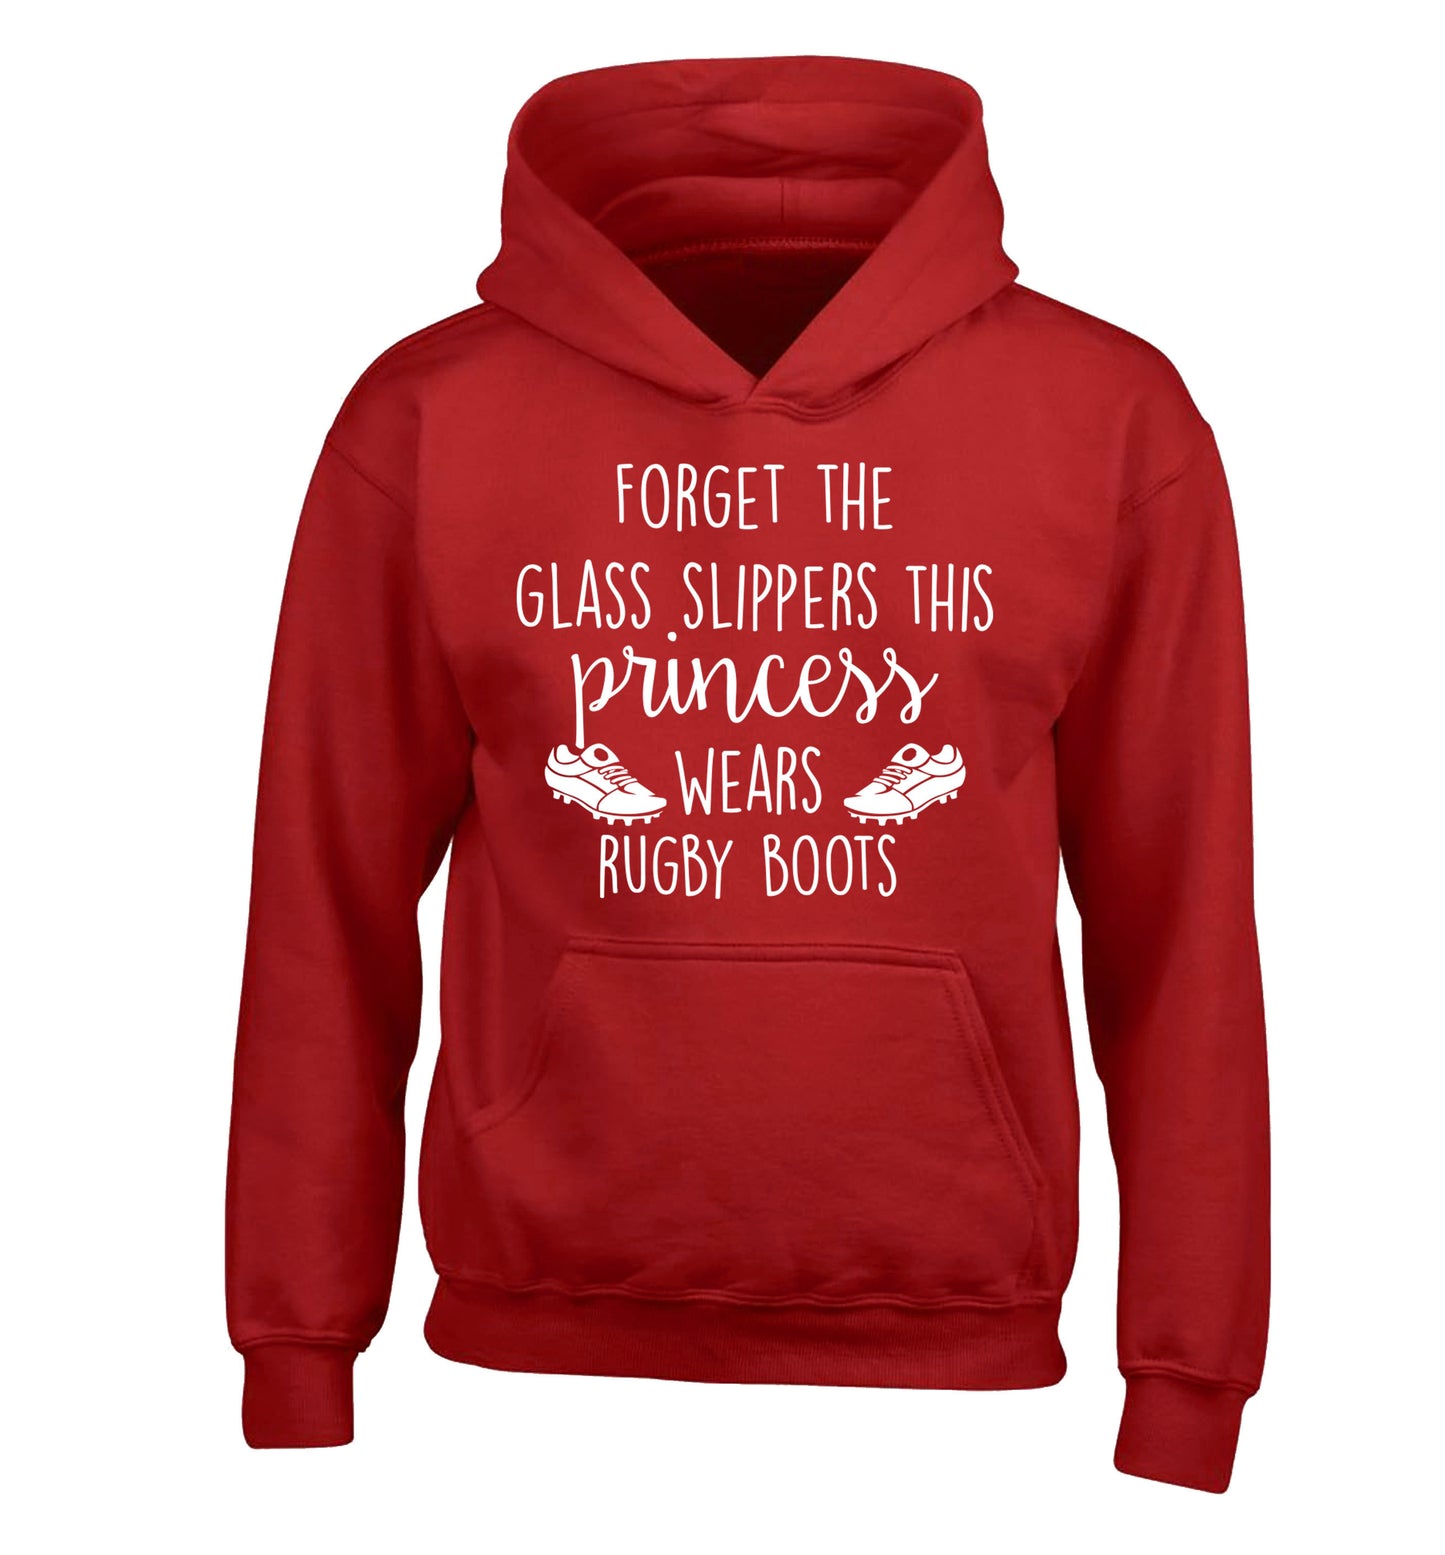 Forget the glass slippers this princess wears rugby boots children's red hoodie 12-14 Years